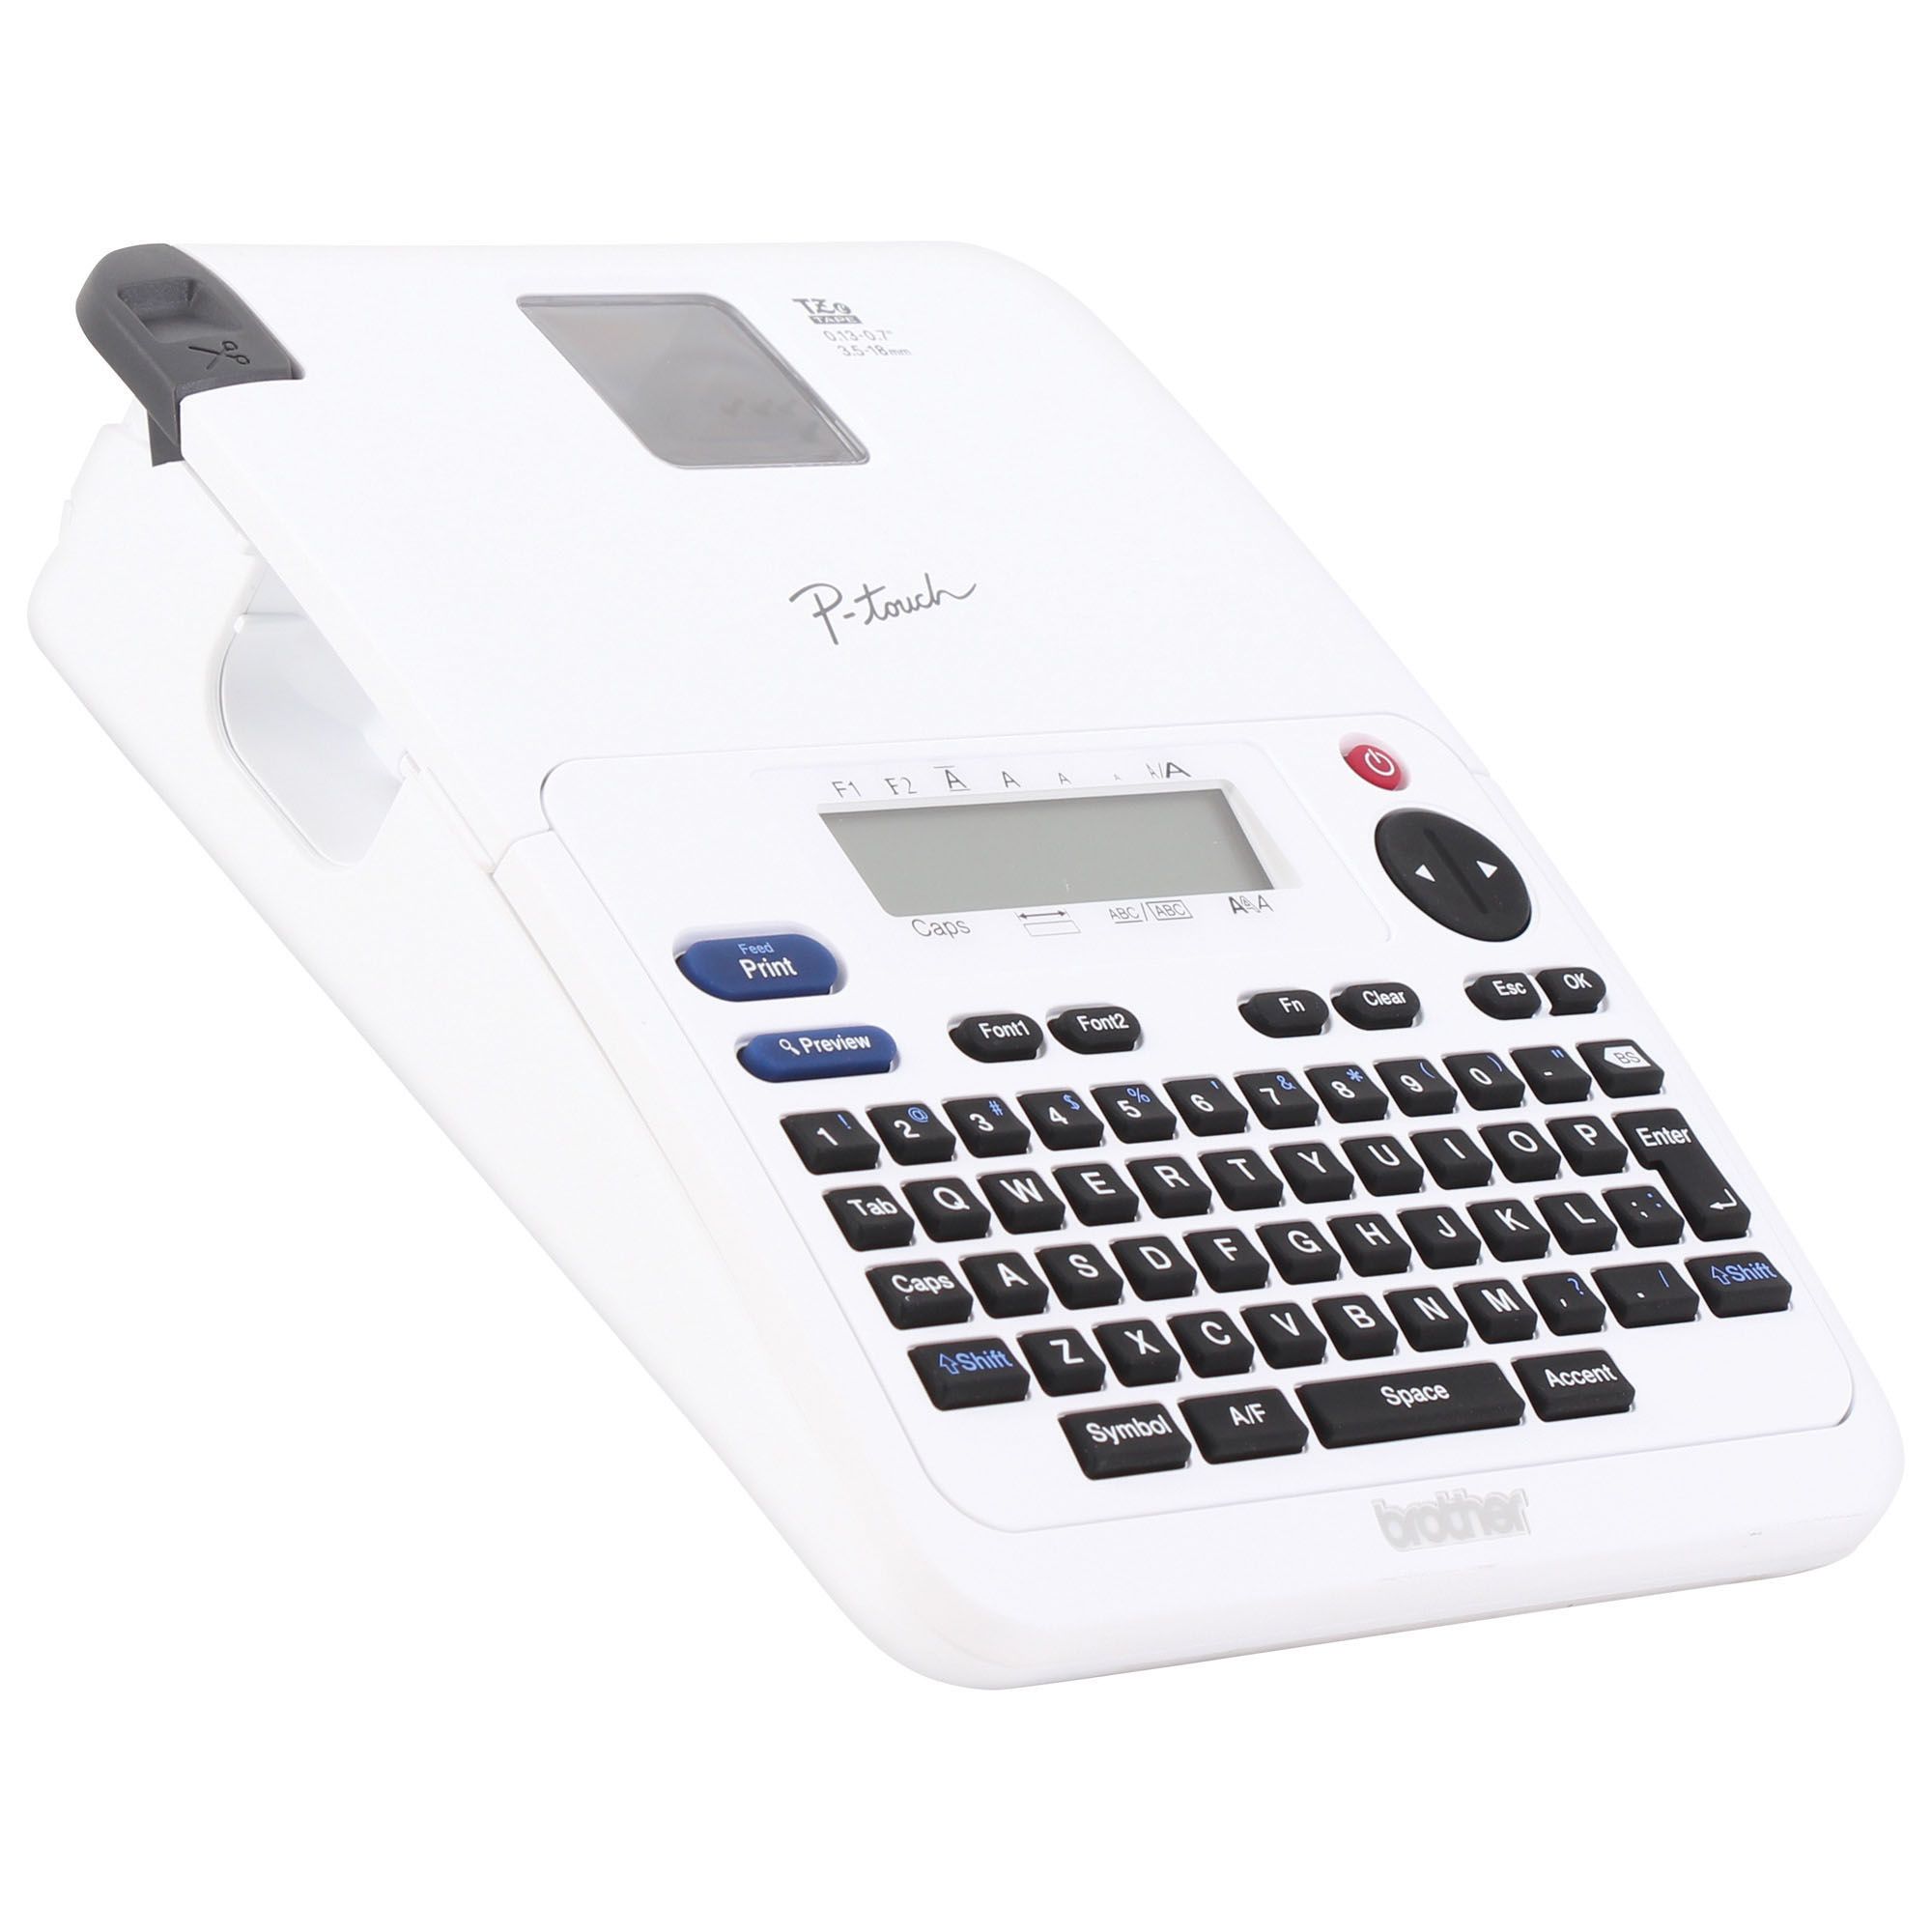 Brother P-Touch Home Personal Label Maker in White and Gray